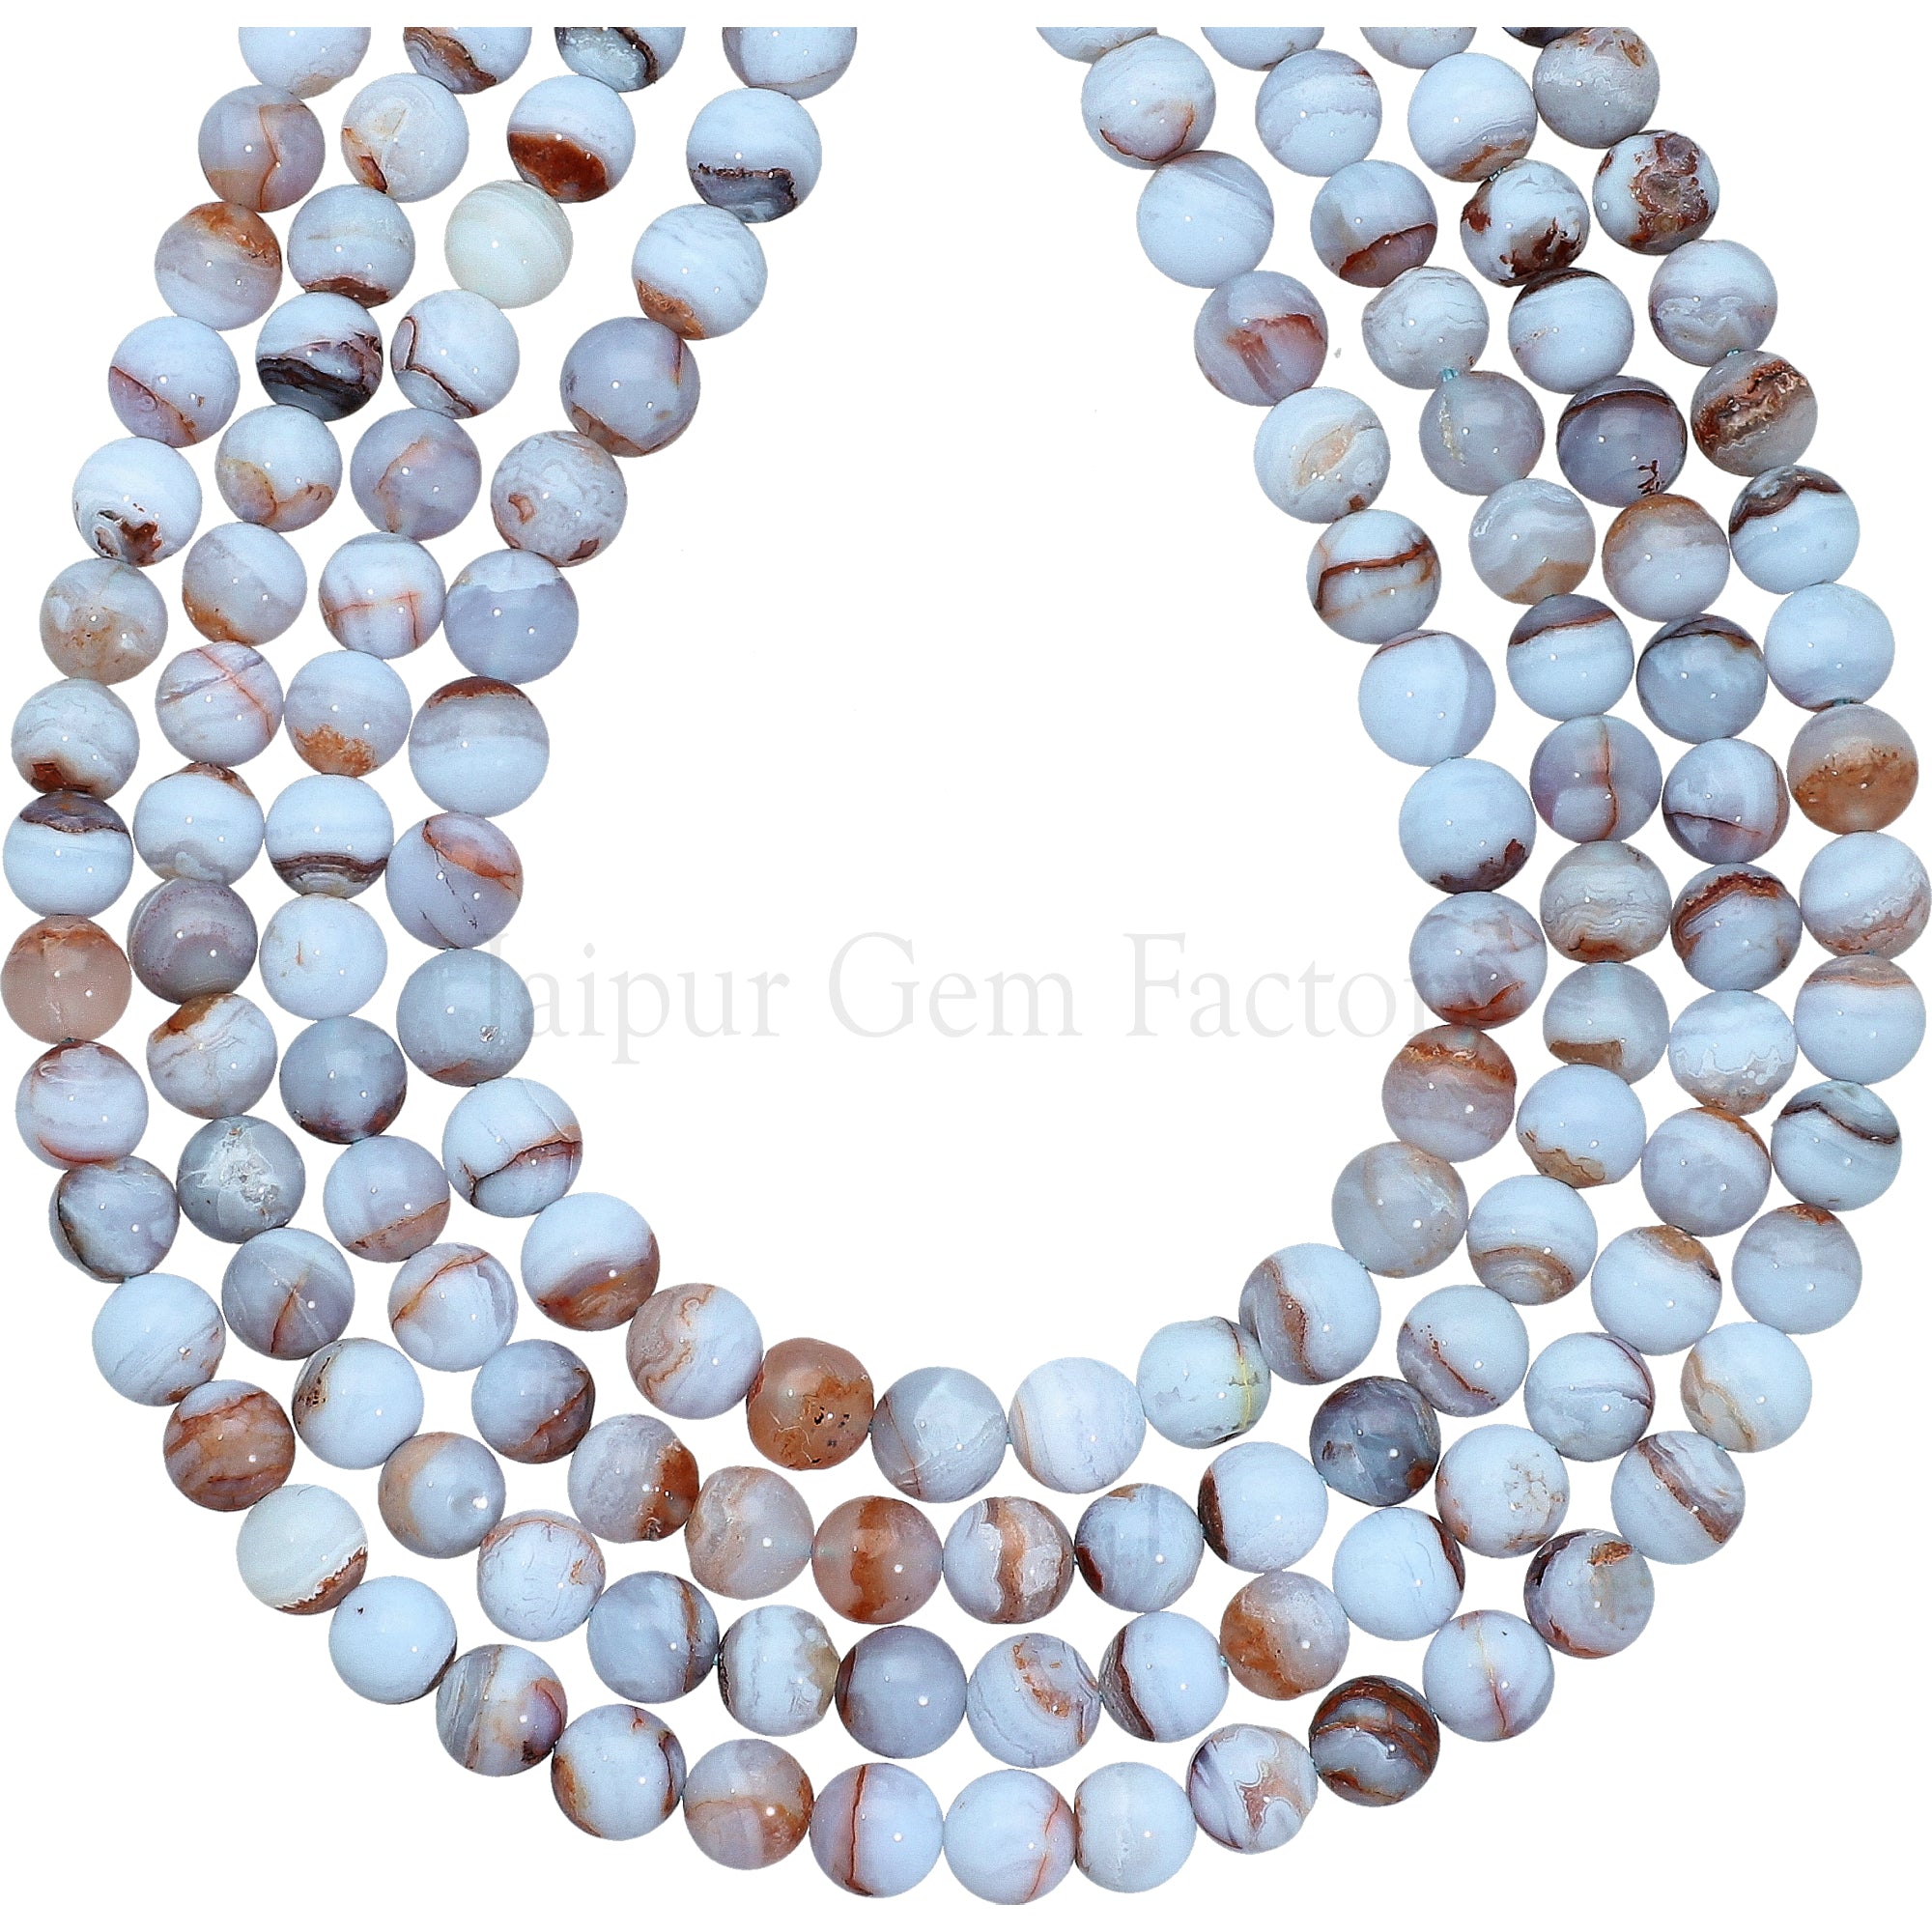 6 MM Blue Lace Agate Smooth Round Beads 14 Inches Strand